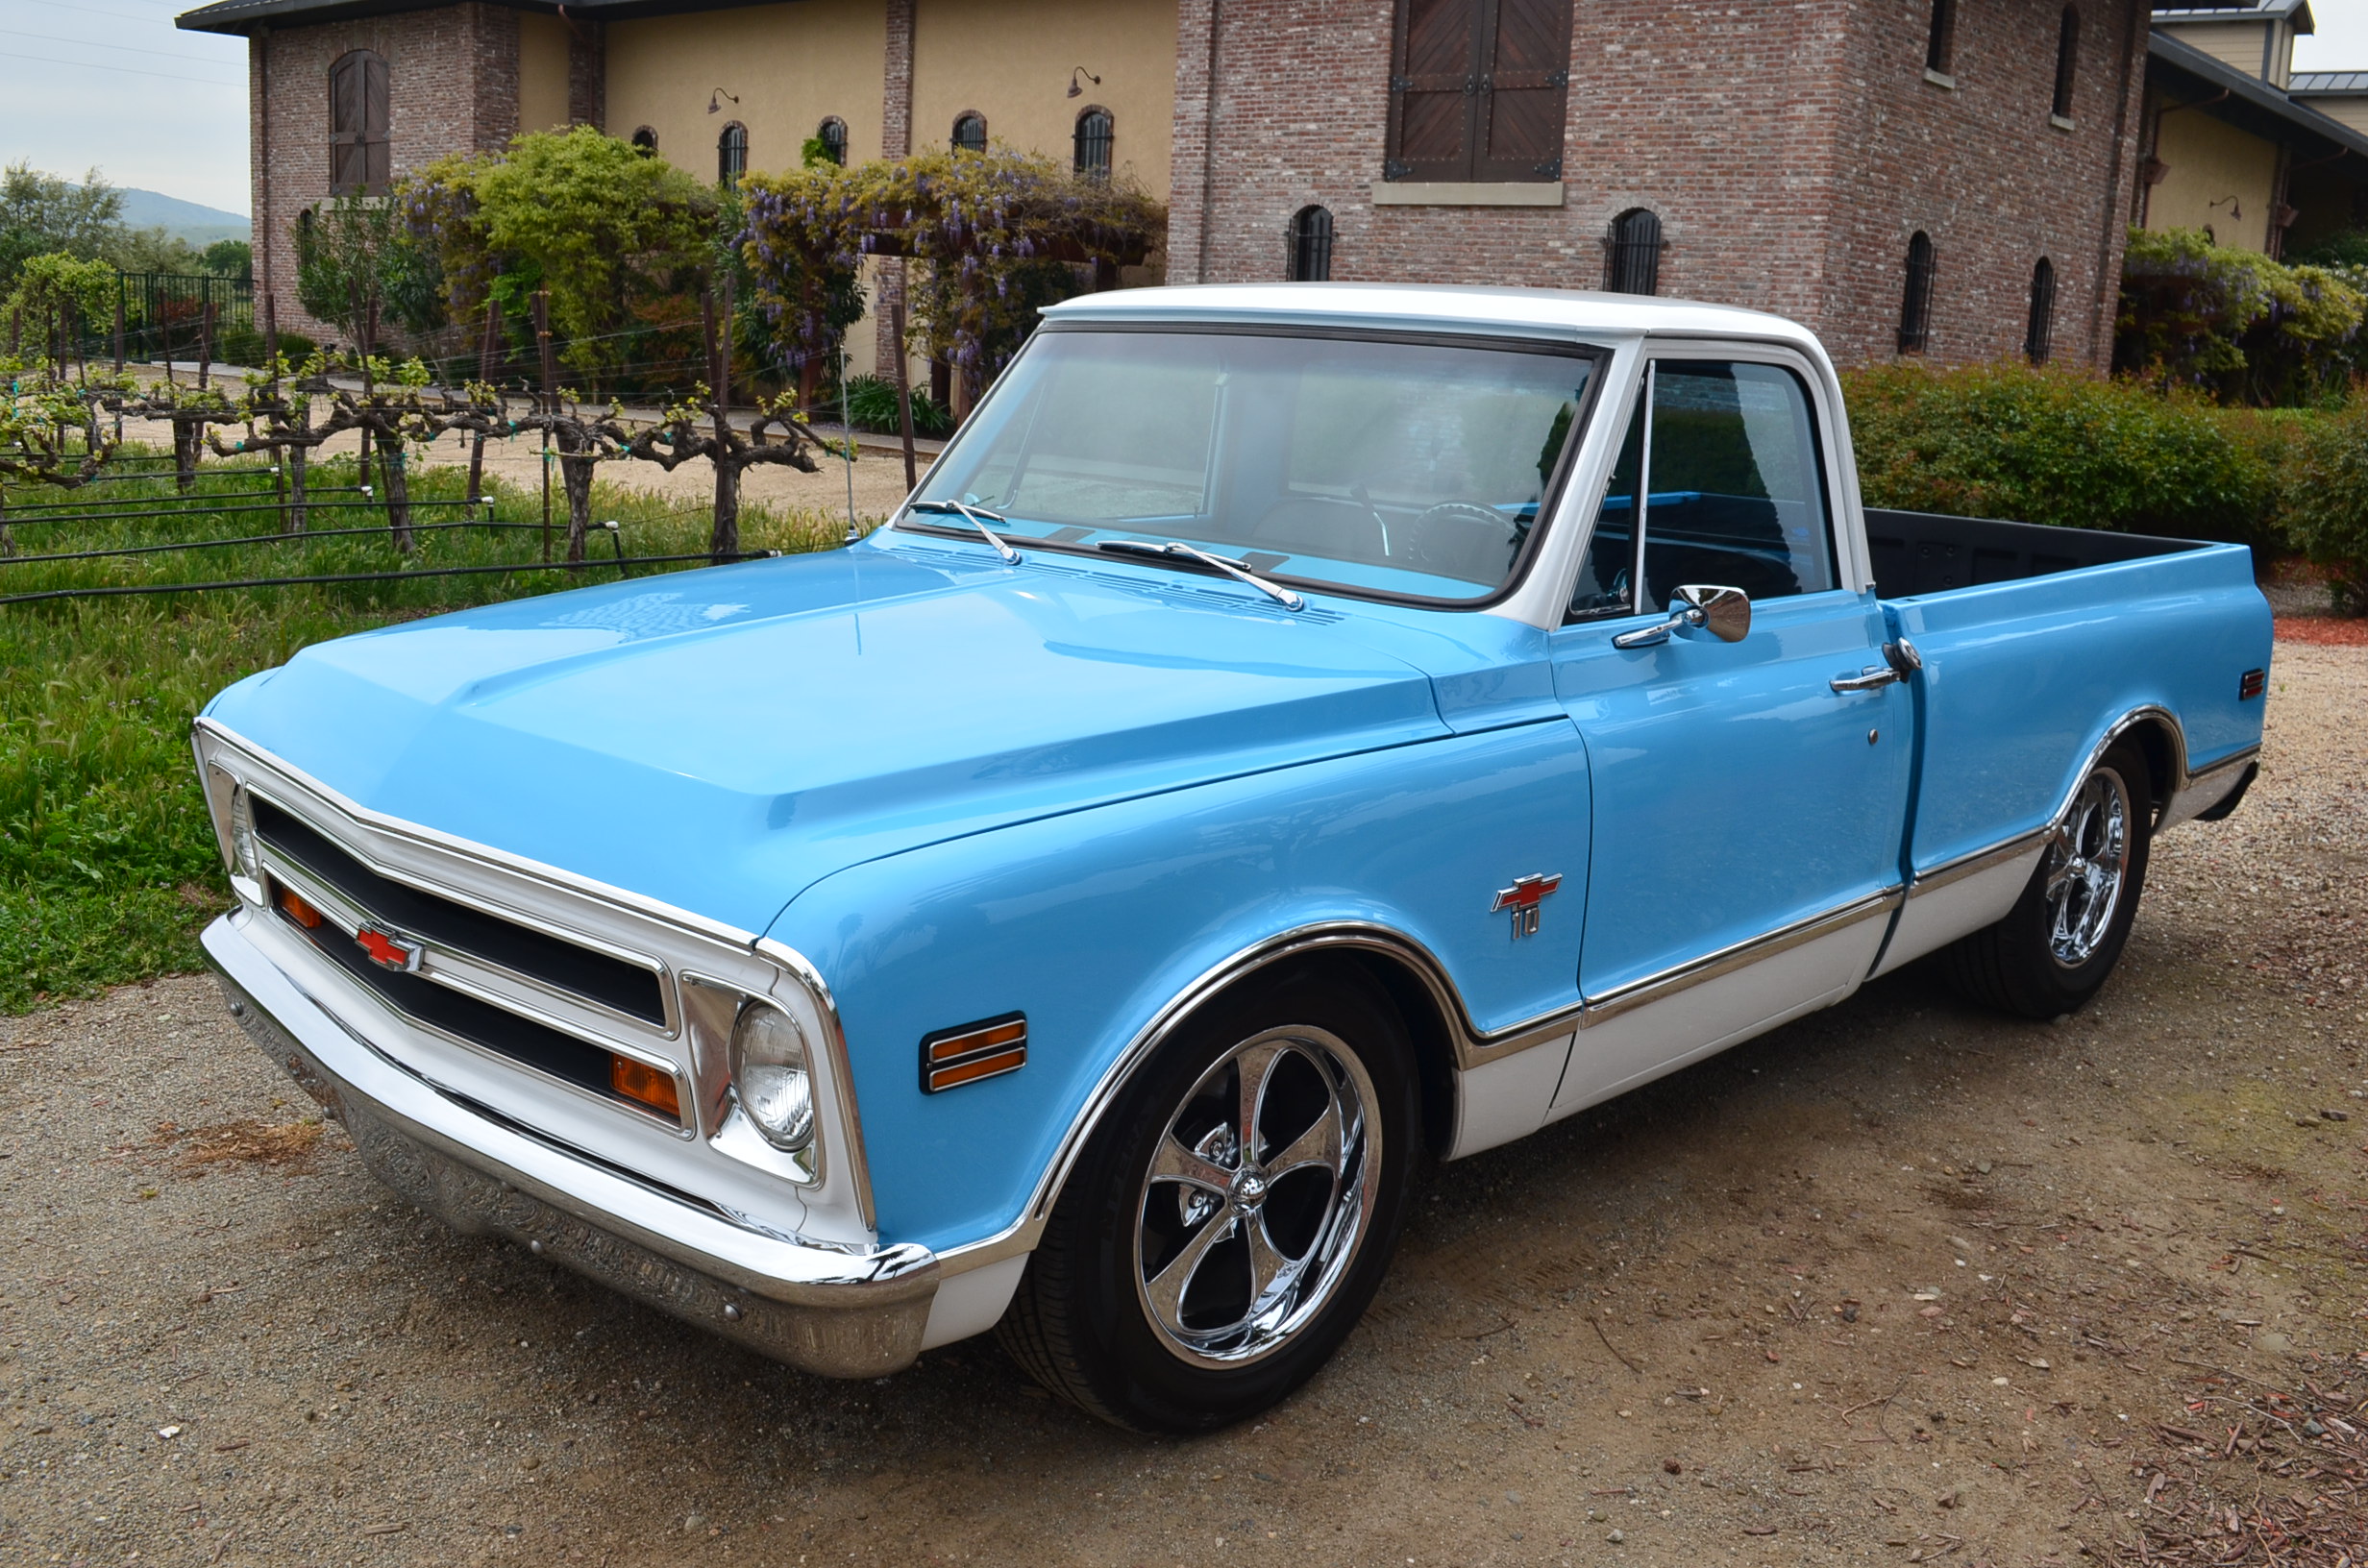 Freshly Restored Chevrolet C10 Short Bed Pickup The Best of the Best in Lat...